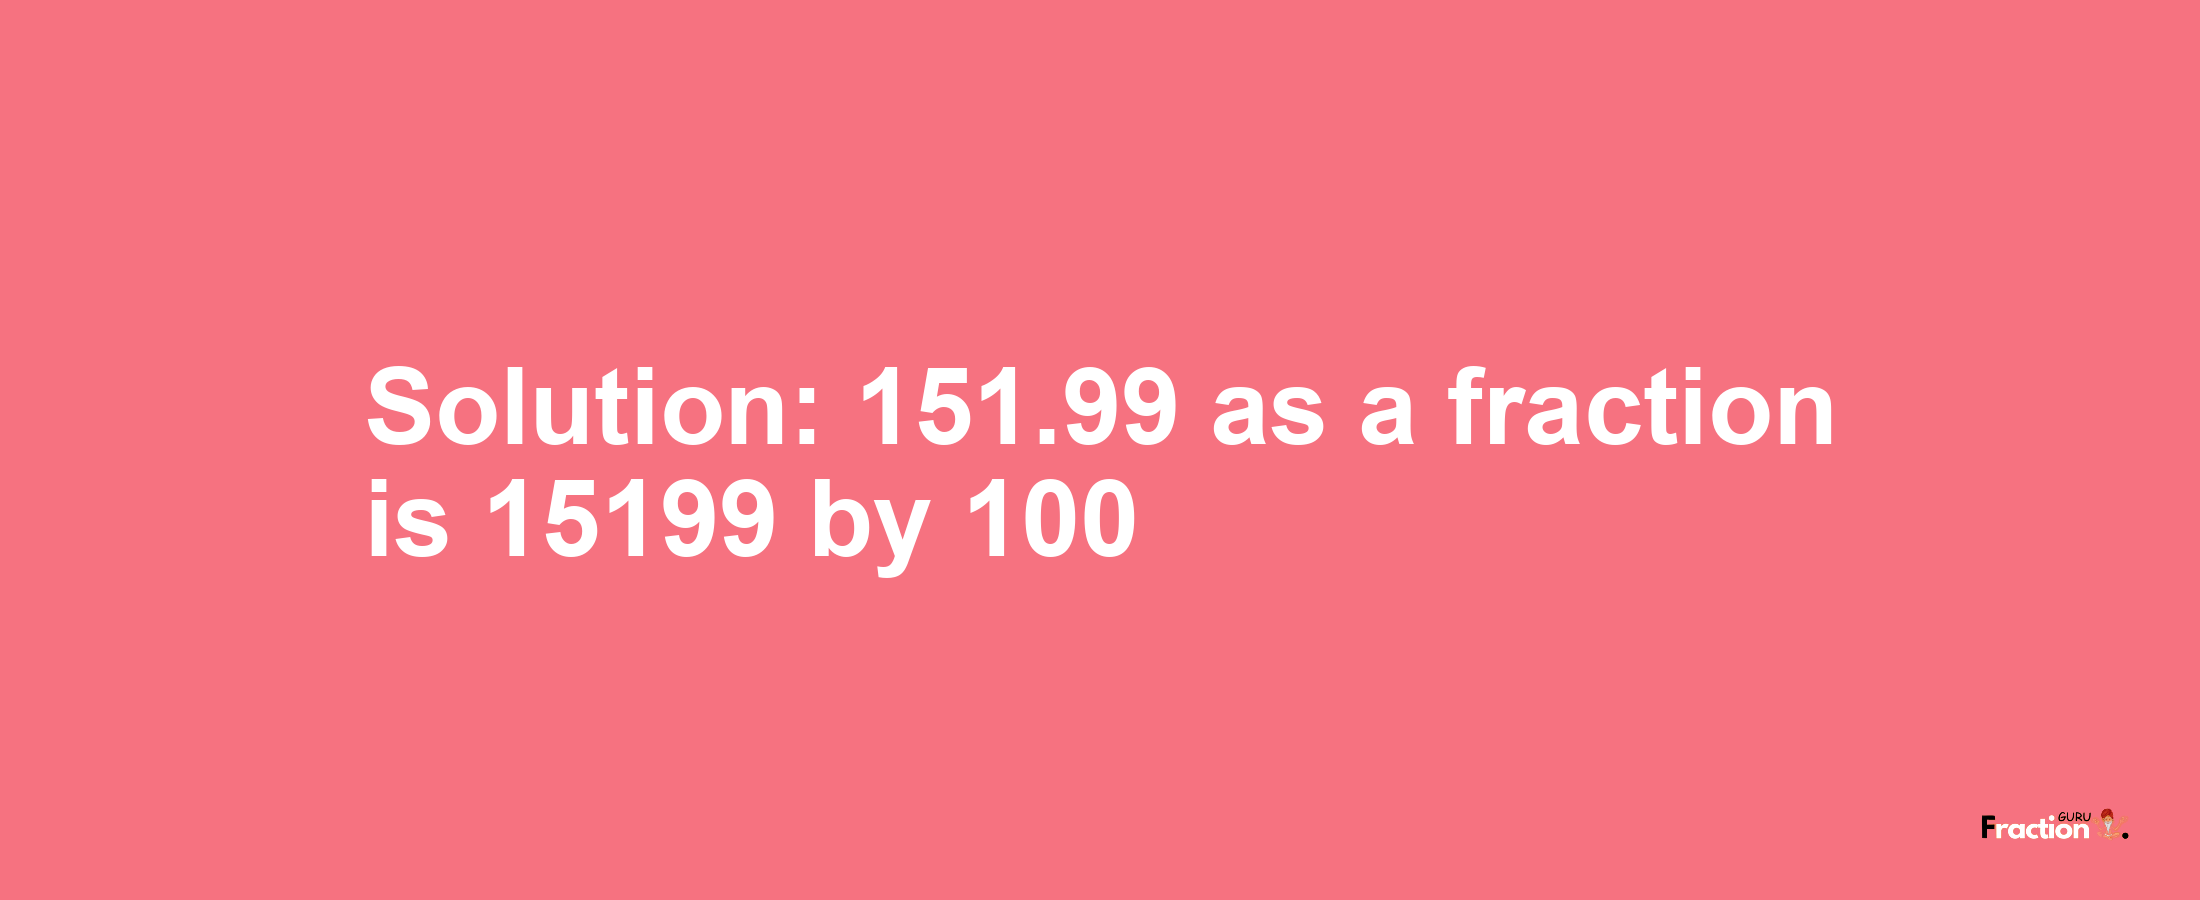 Solution:151.99 as a fraction is 15199/100